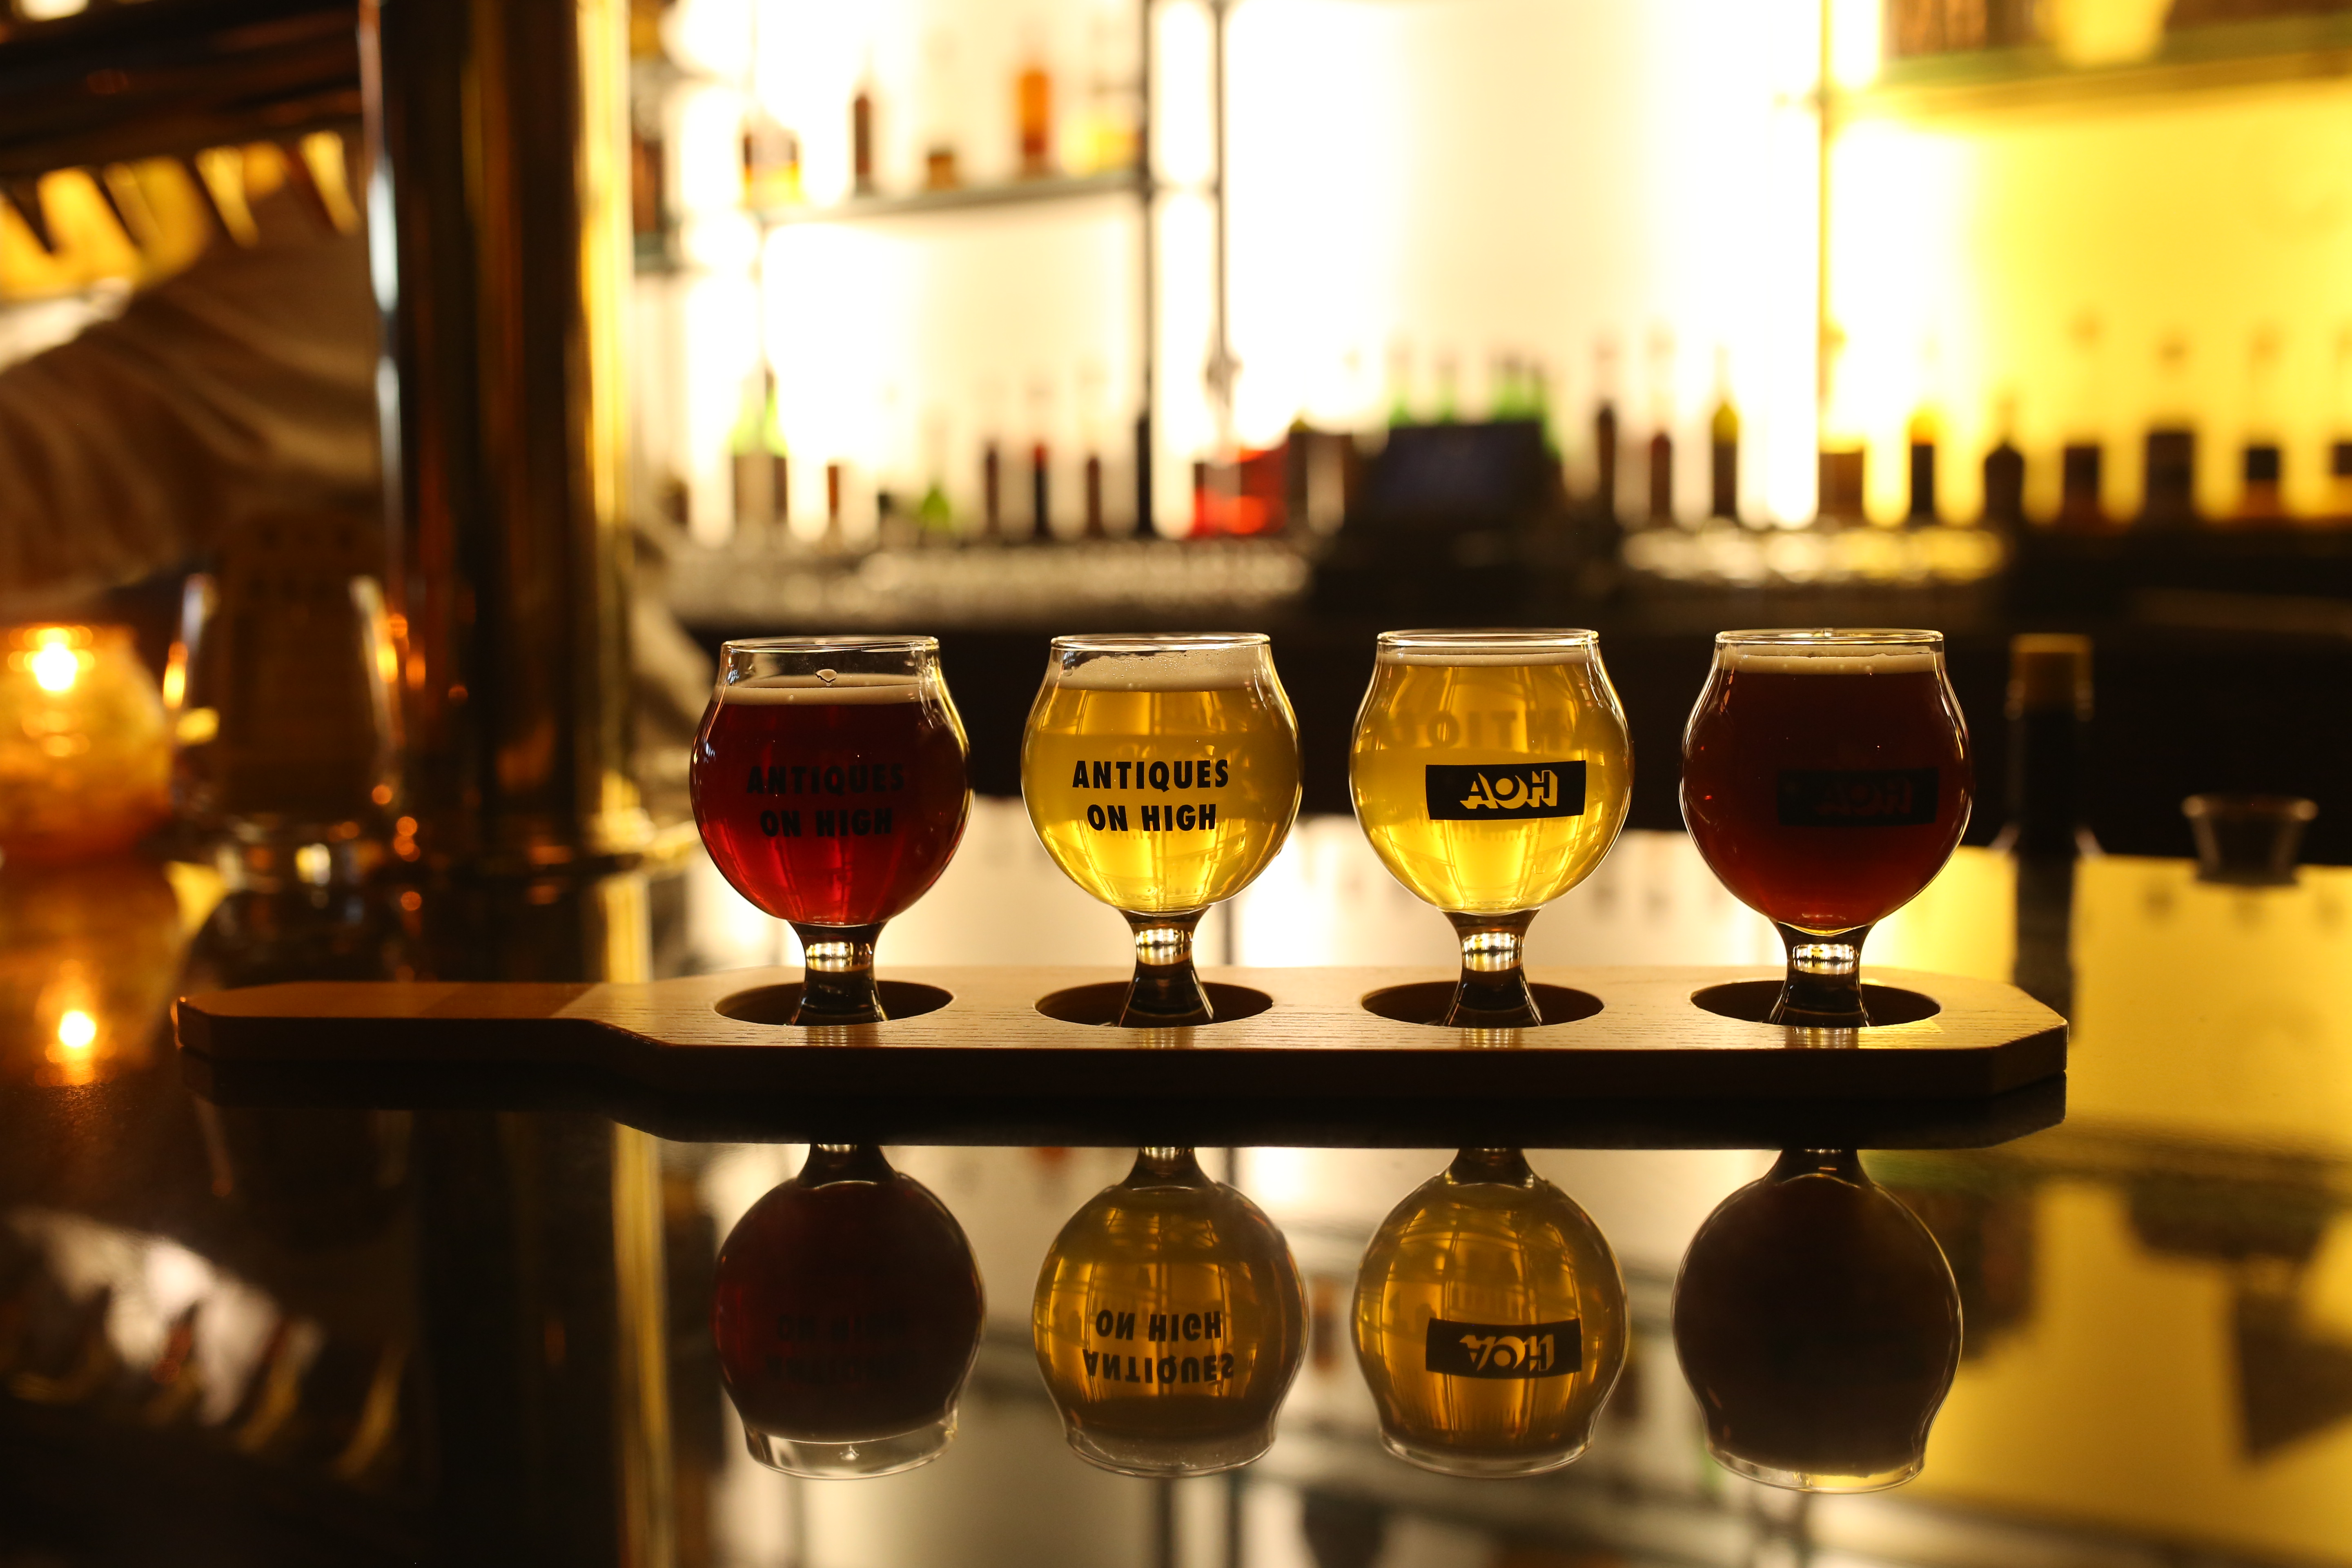 Flight of colorful sour beers on bar in dimly-lit Antiques on High